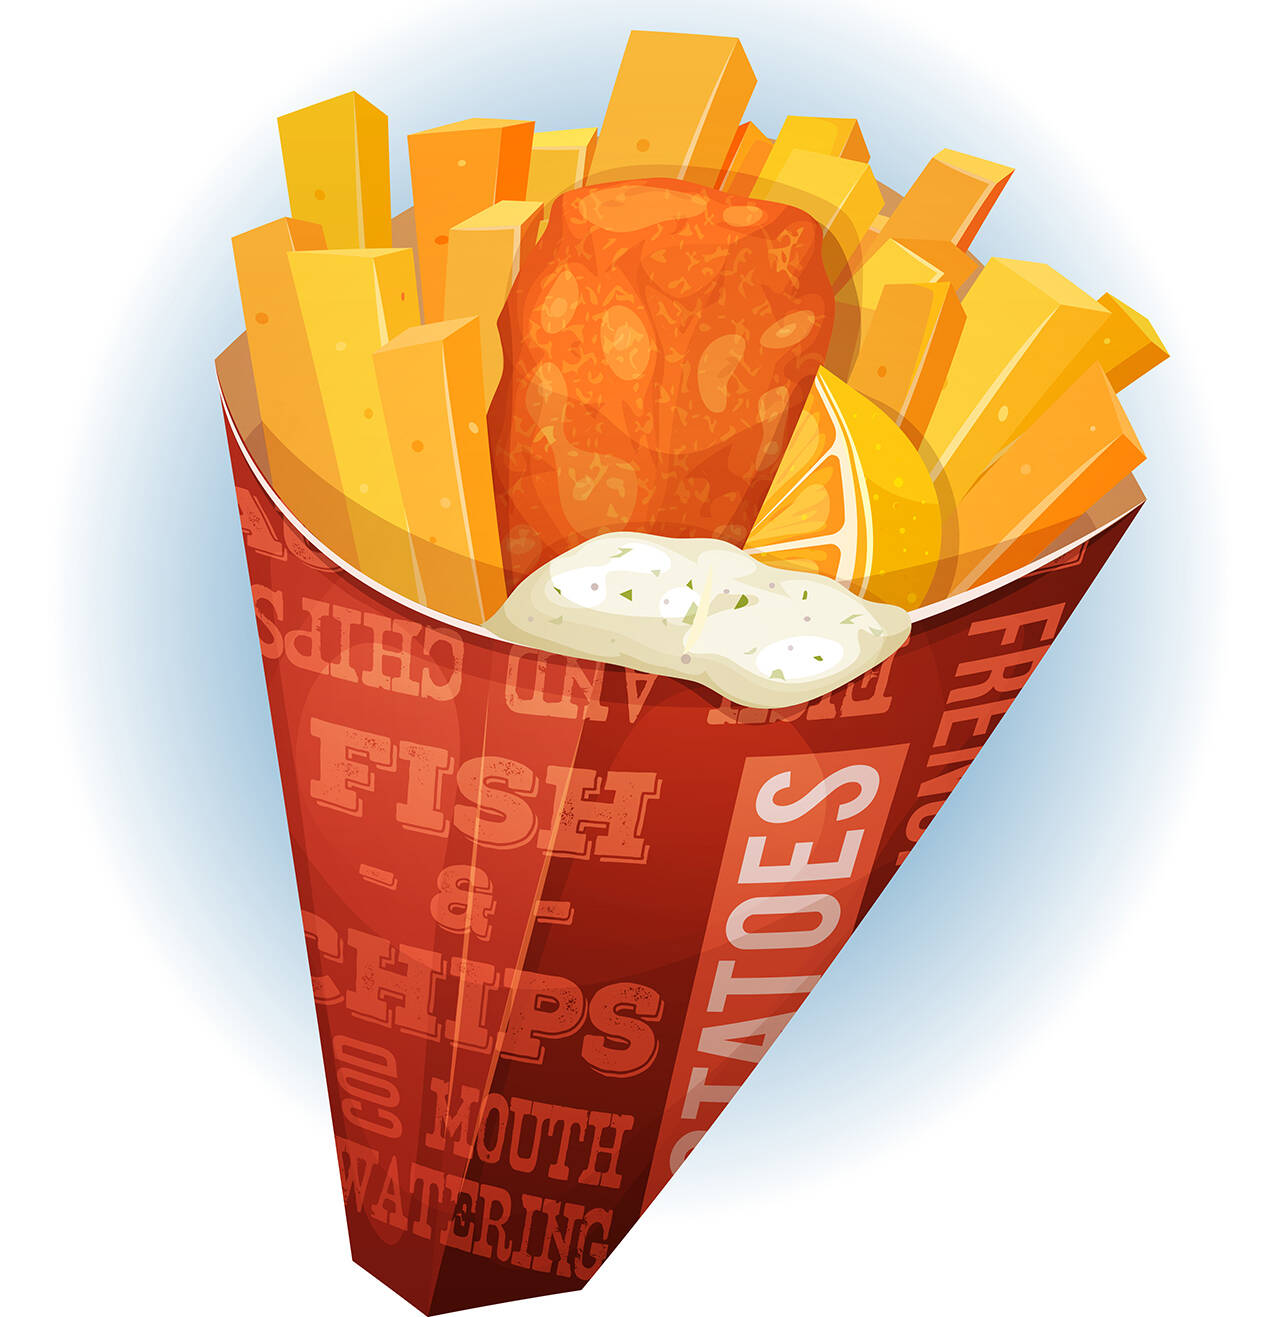 Vector illustration of a cartoon appetizing british fish and chips meal, with fried fish and potatoes inside red cornet, for snack restaurant and takeaway food. File is EPS10 and uses multiply and overlay transparency. Vector eps and high resolution jpeg files included